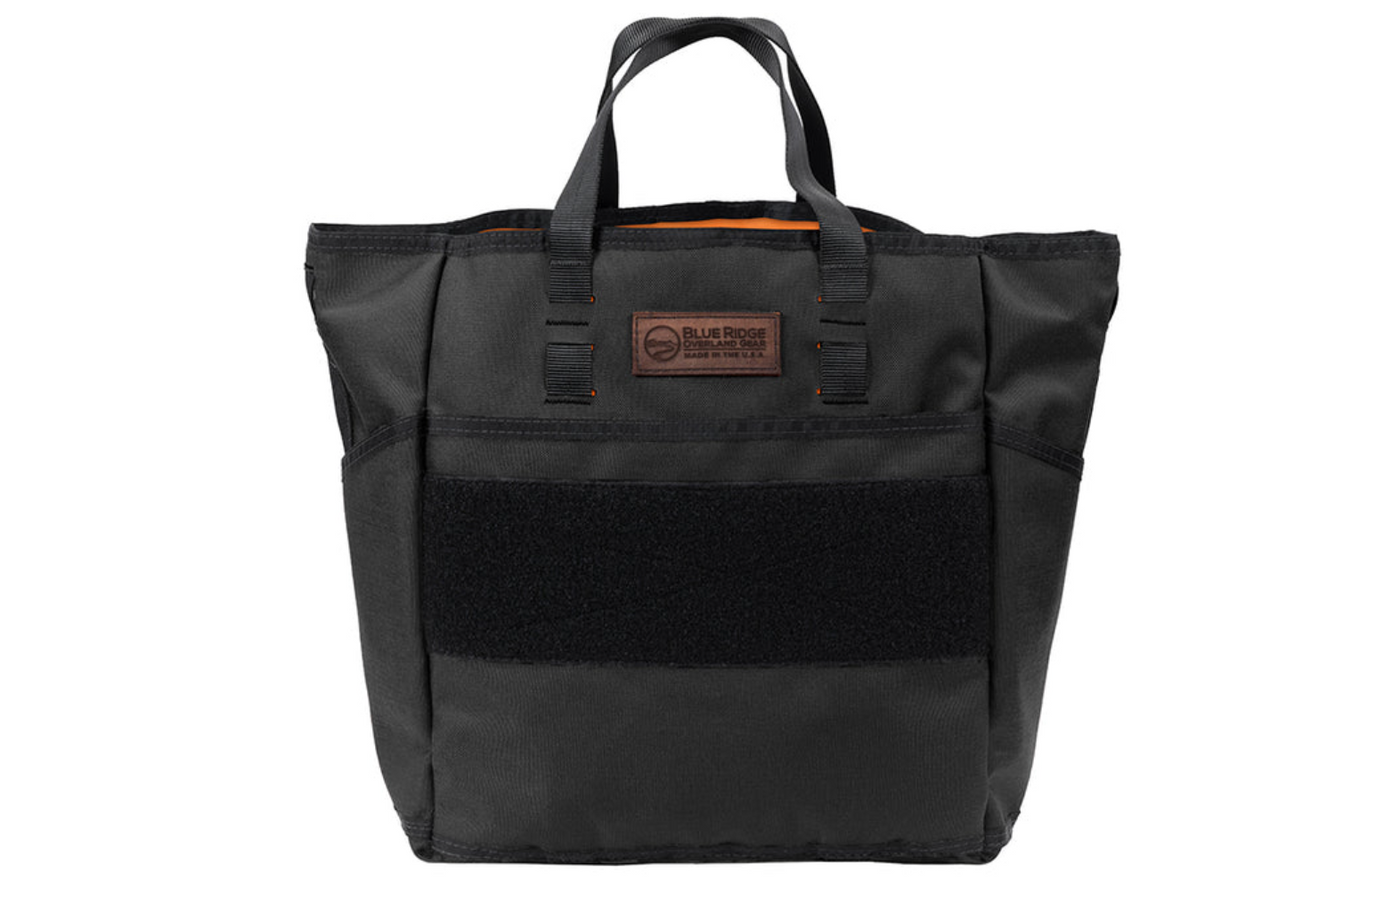 Tote Bag by Blue Ridge Overland Gear